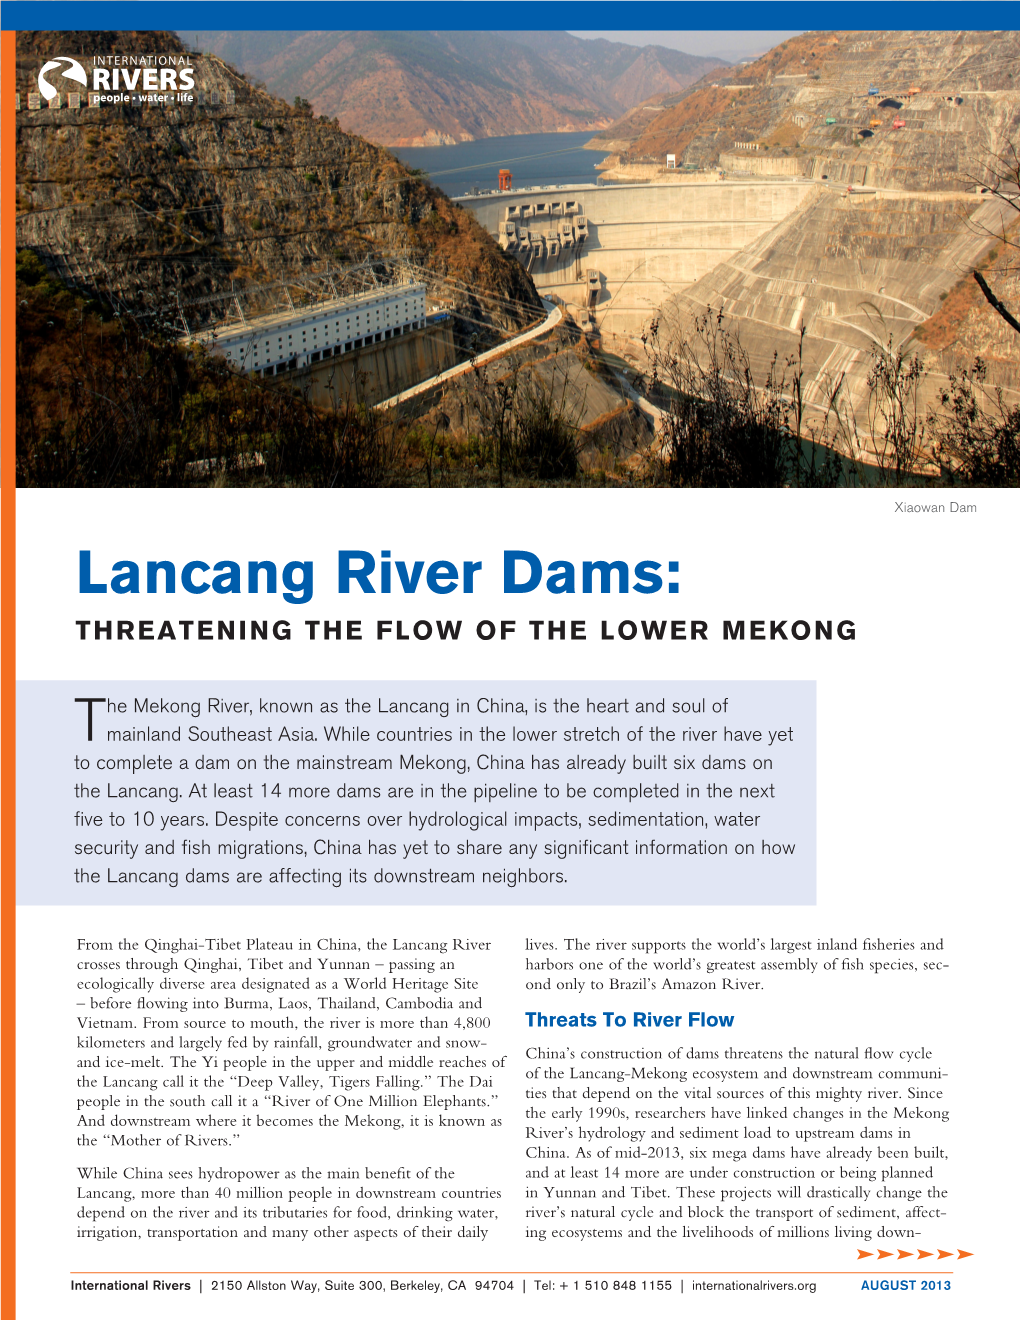 Lancang River Dams: THREATENING the FLOW of the LOWER MEKONG